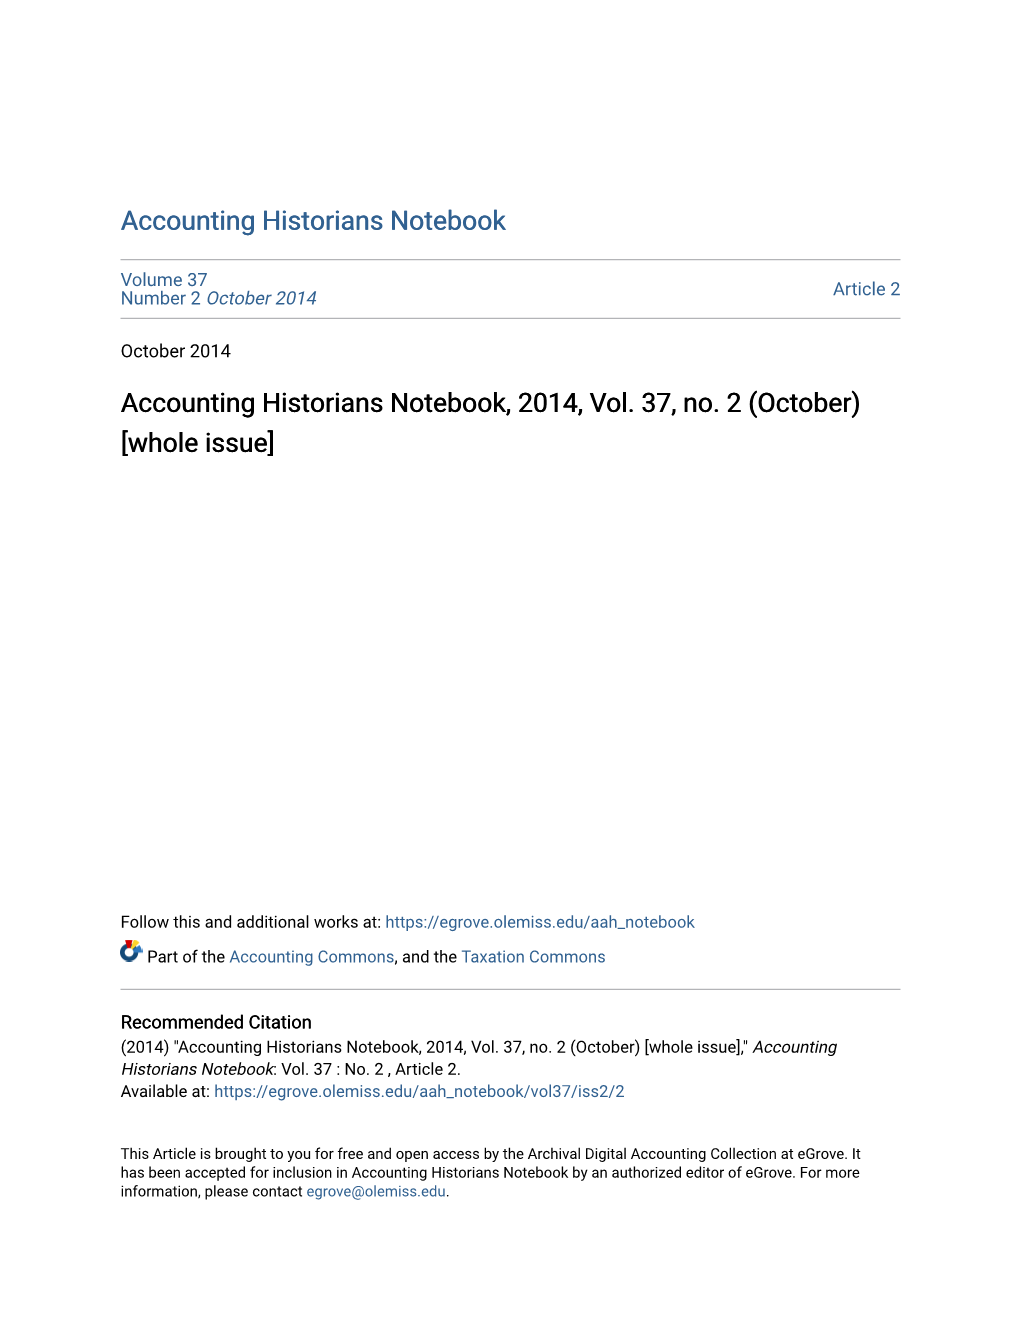 Accounting Historians Notebook, 2014, Vol. 37, No. 2 (October) [Whole Issue]